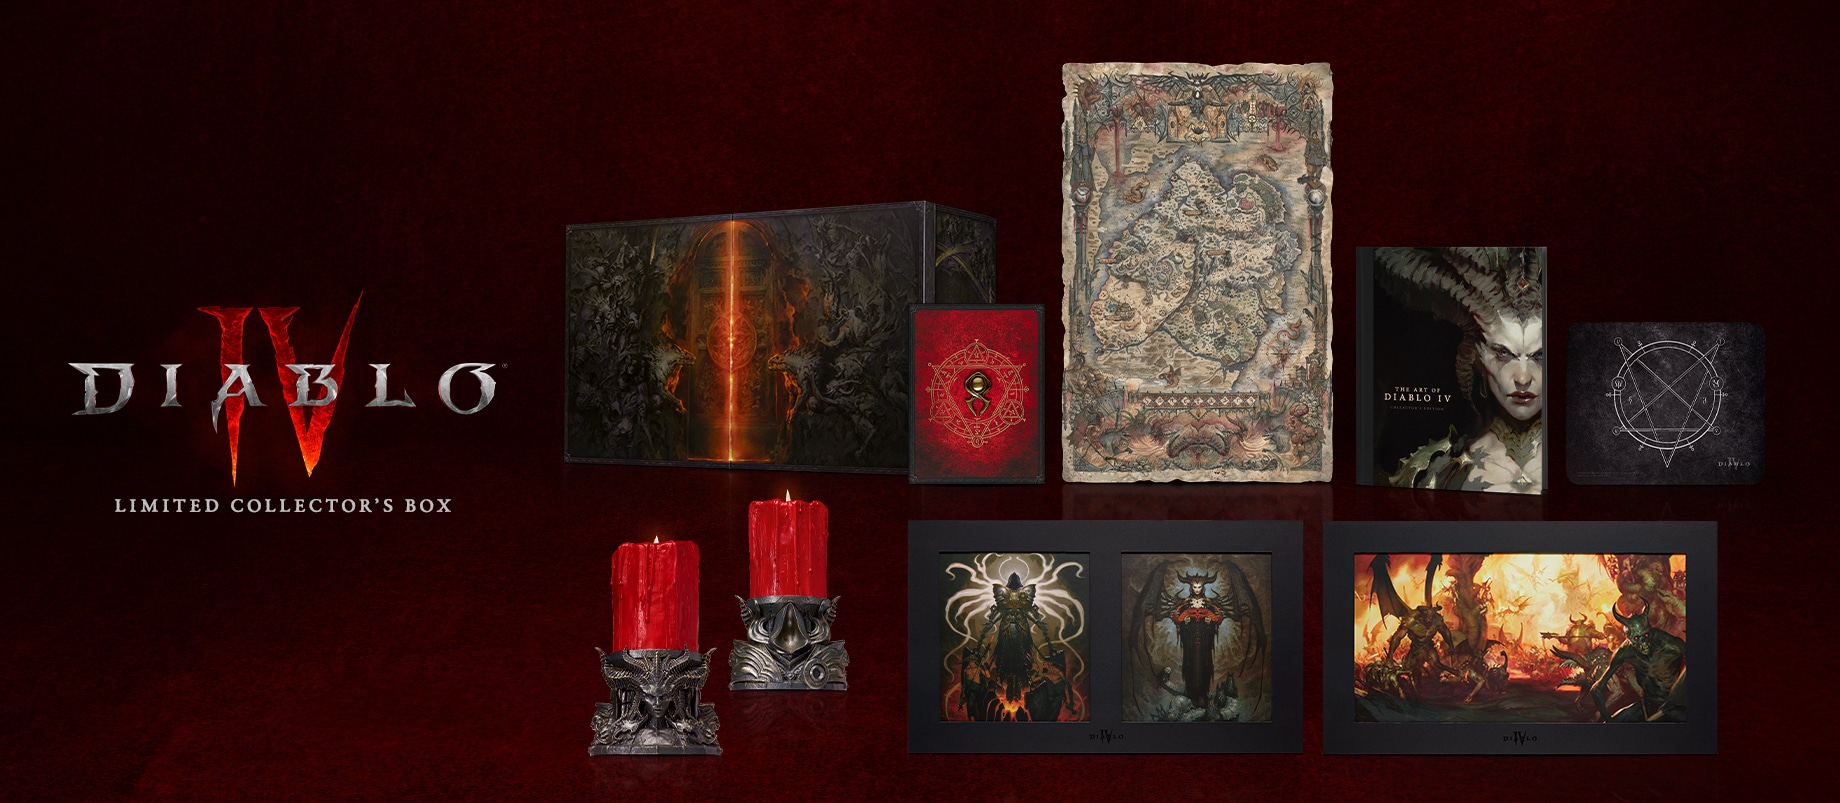 Hell is coming: Get the Diablo® IV Limited Collector’s Box now!